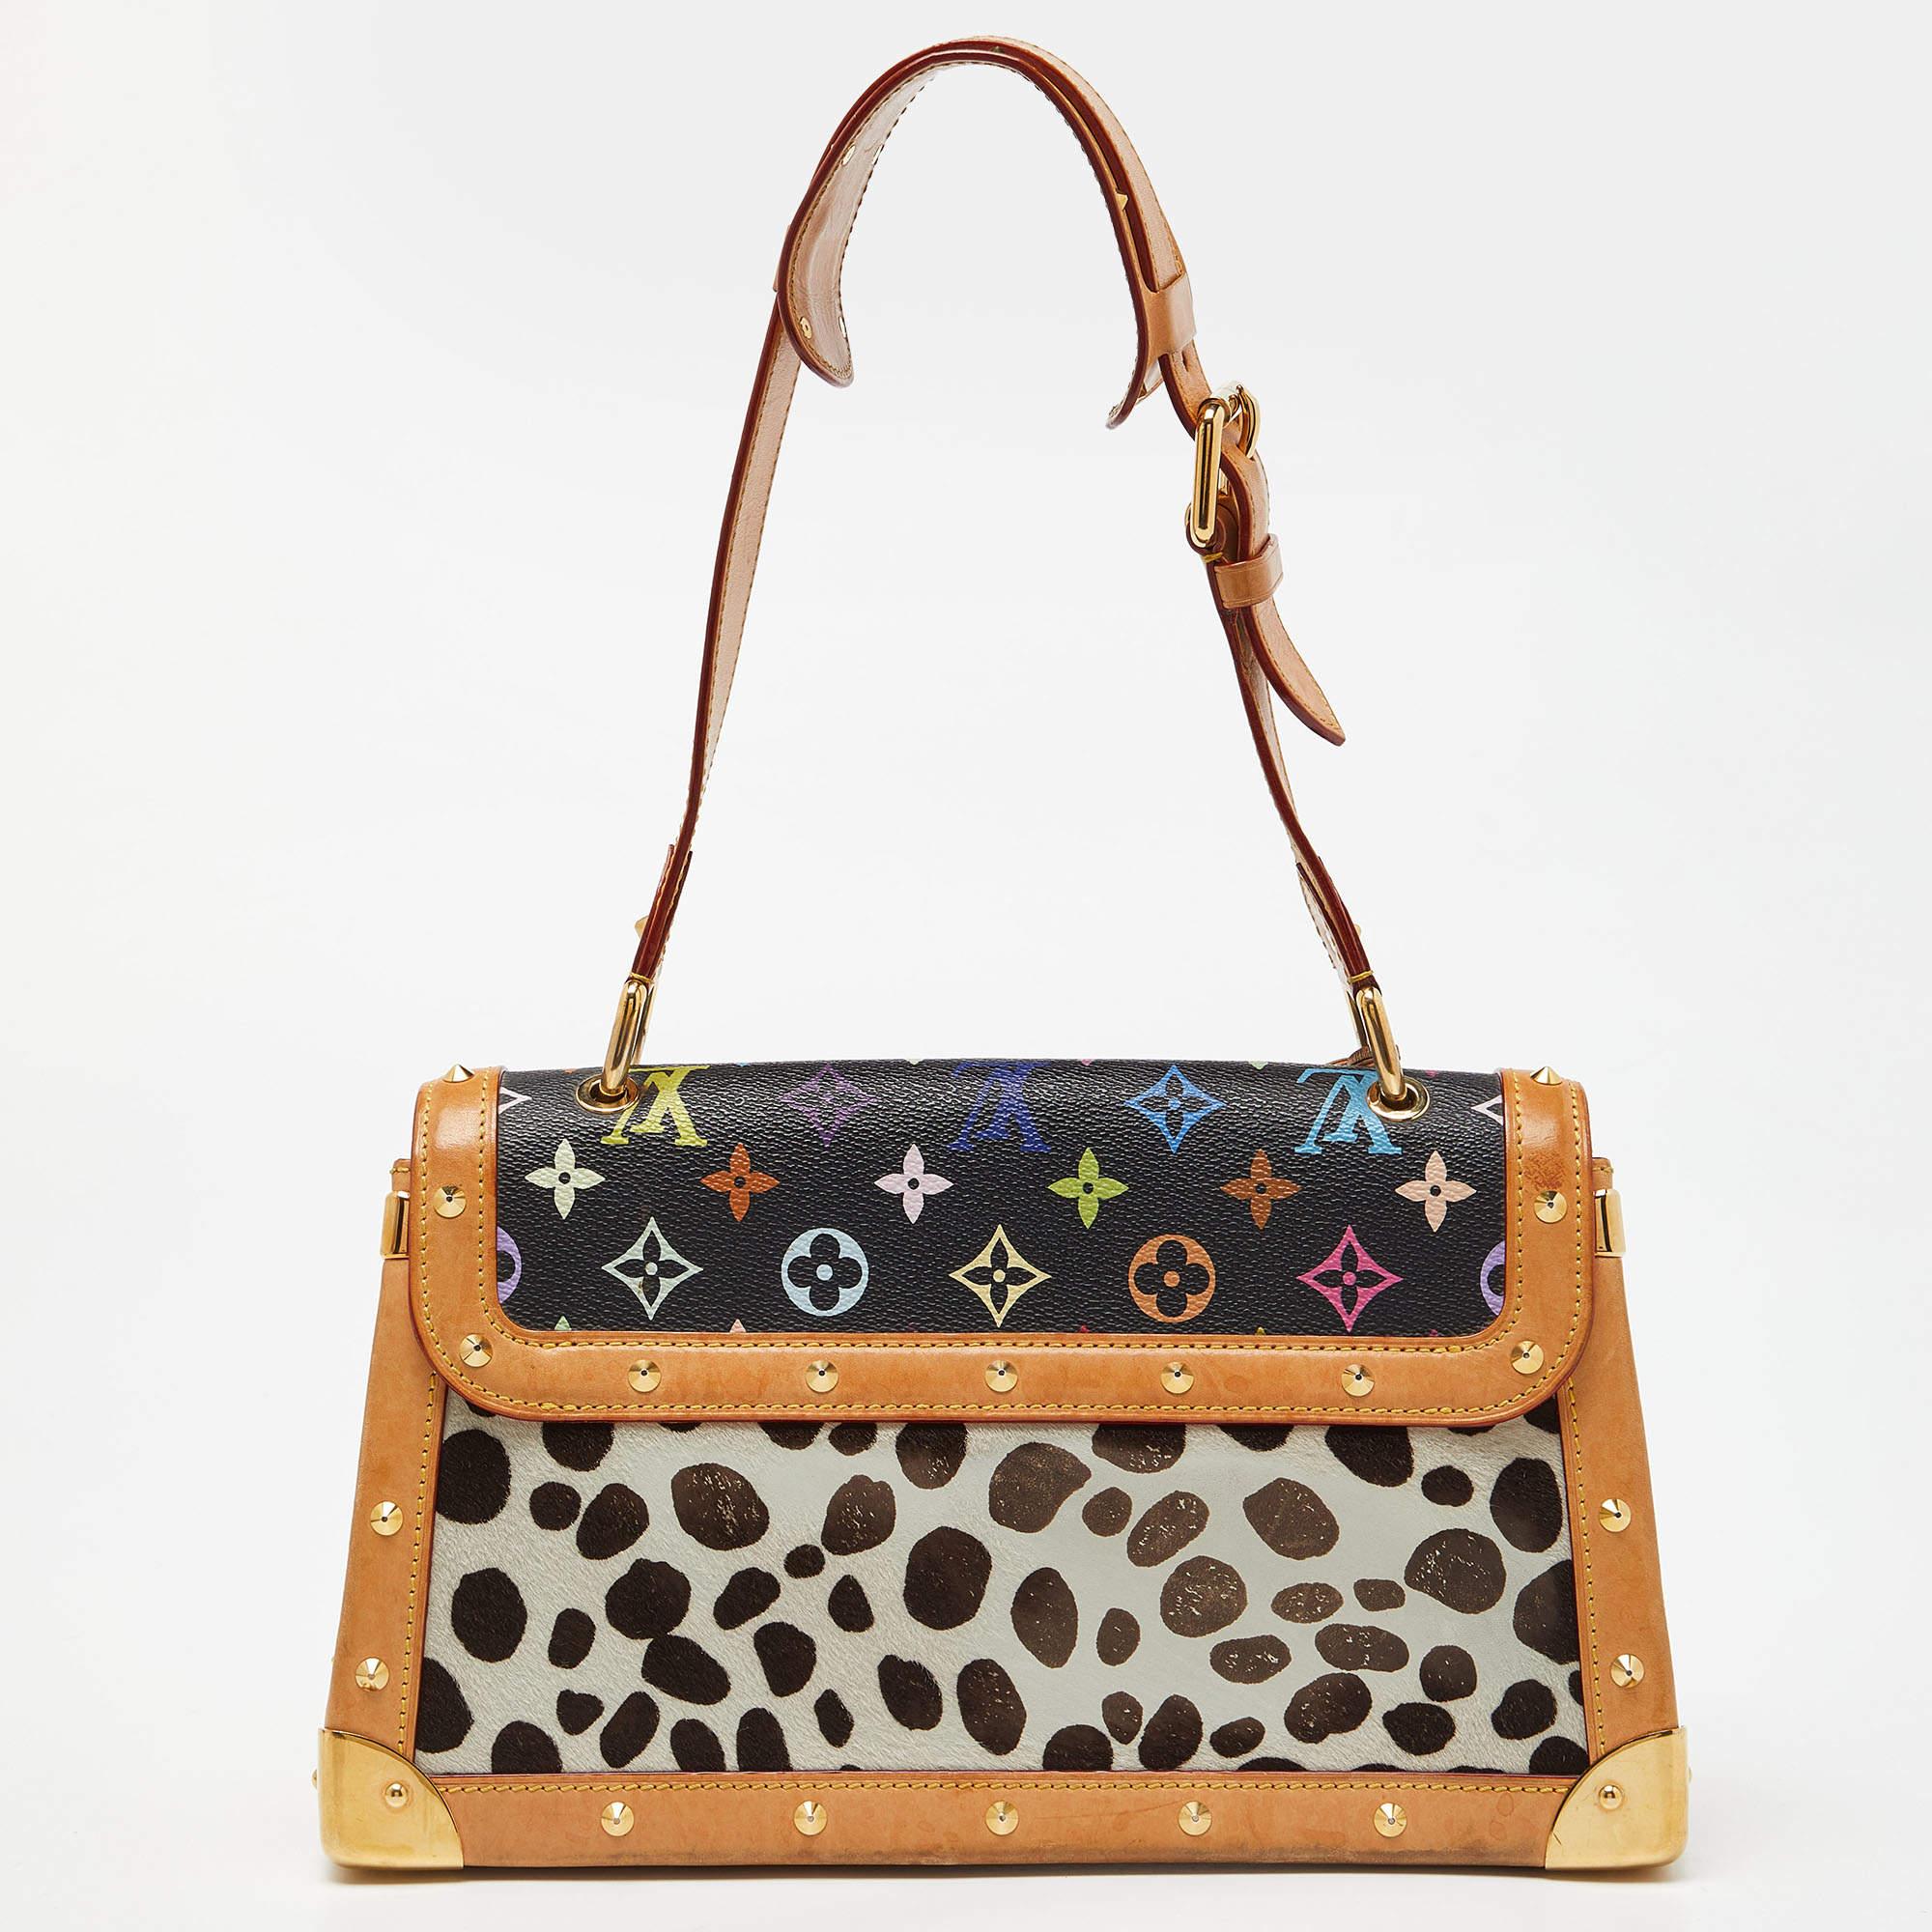 The multicolor monogram was created by the Japanese designer Takashi Murakami for Louis Vuitton in 2003. The monogram canvas, paired with Dalmatian printed calf hair, adds a unique touch to this Sac Rabat. It's worth investing in.

